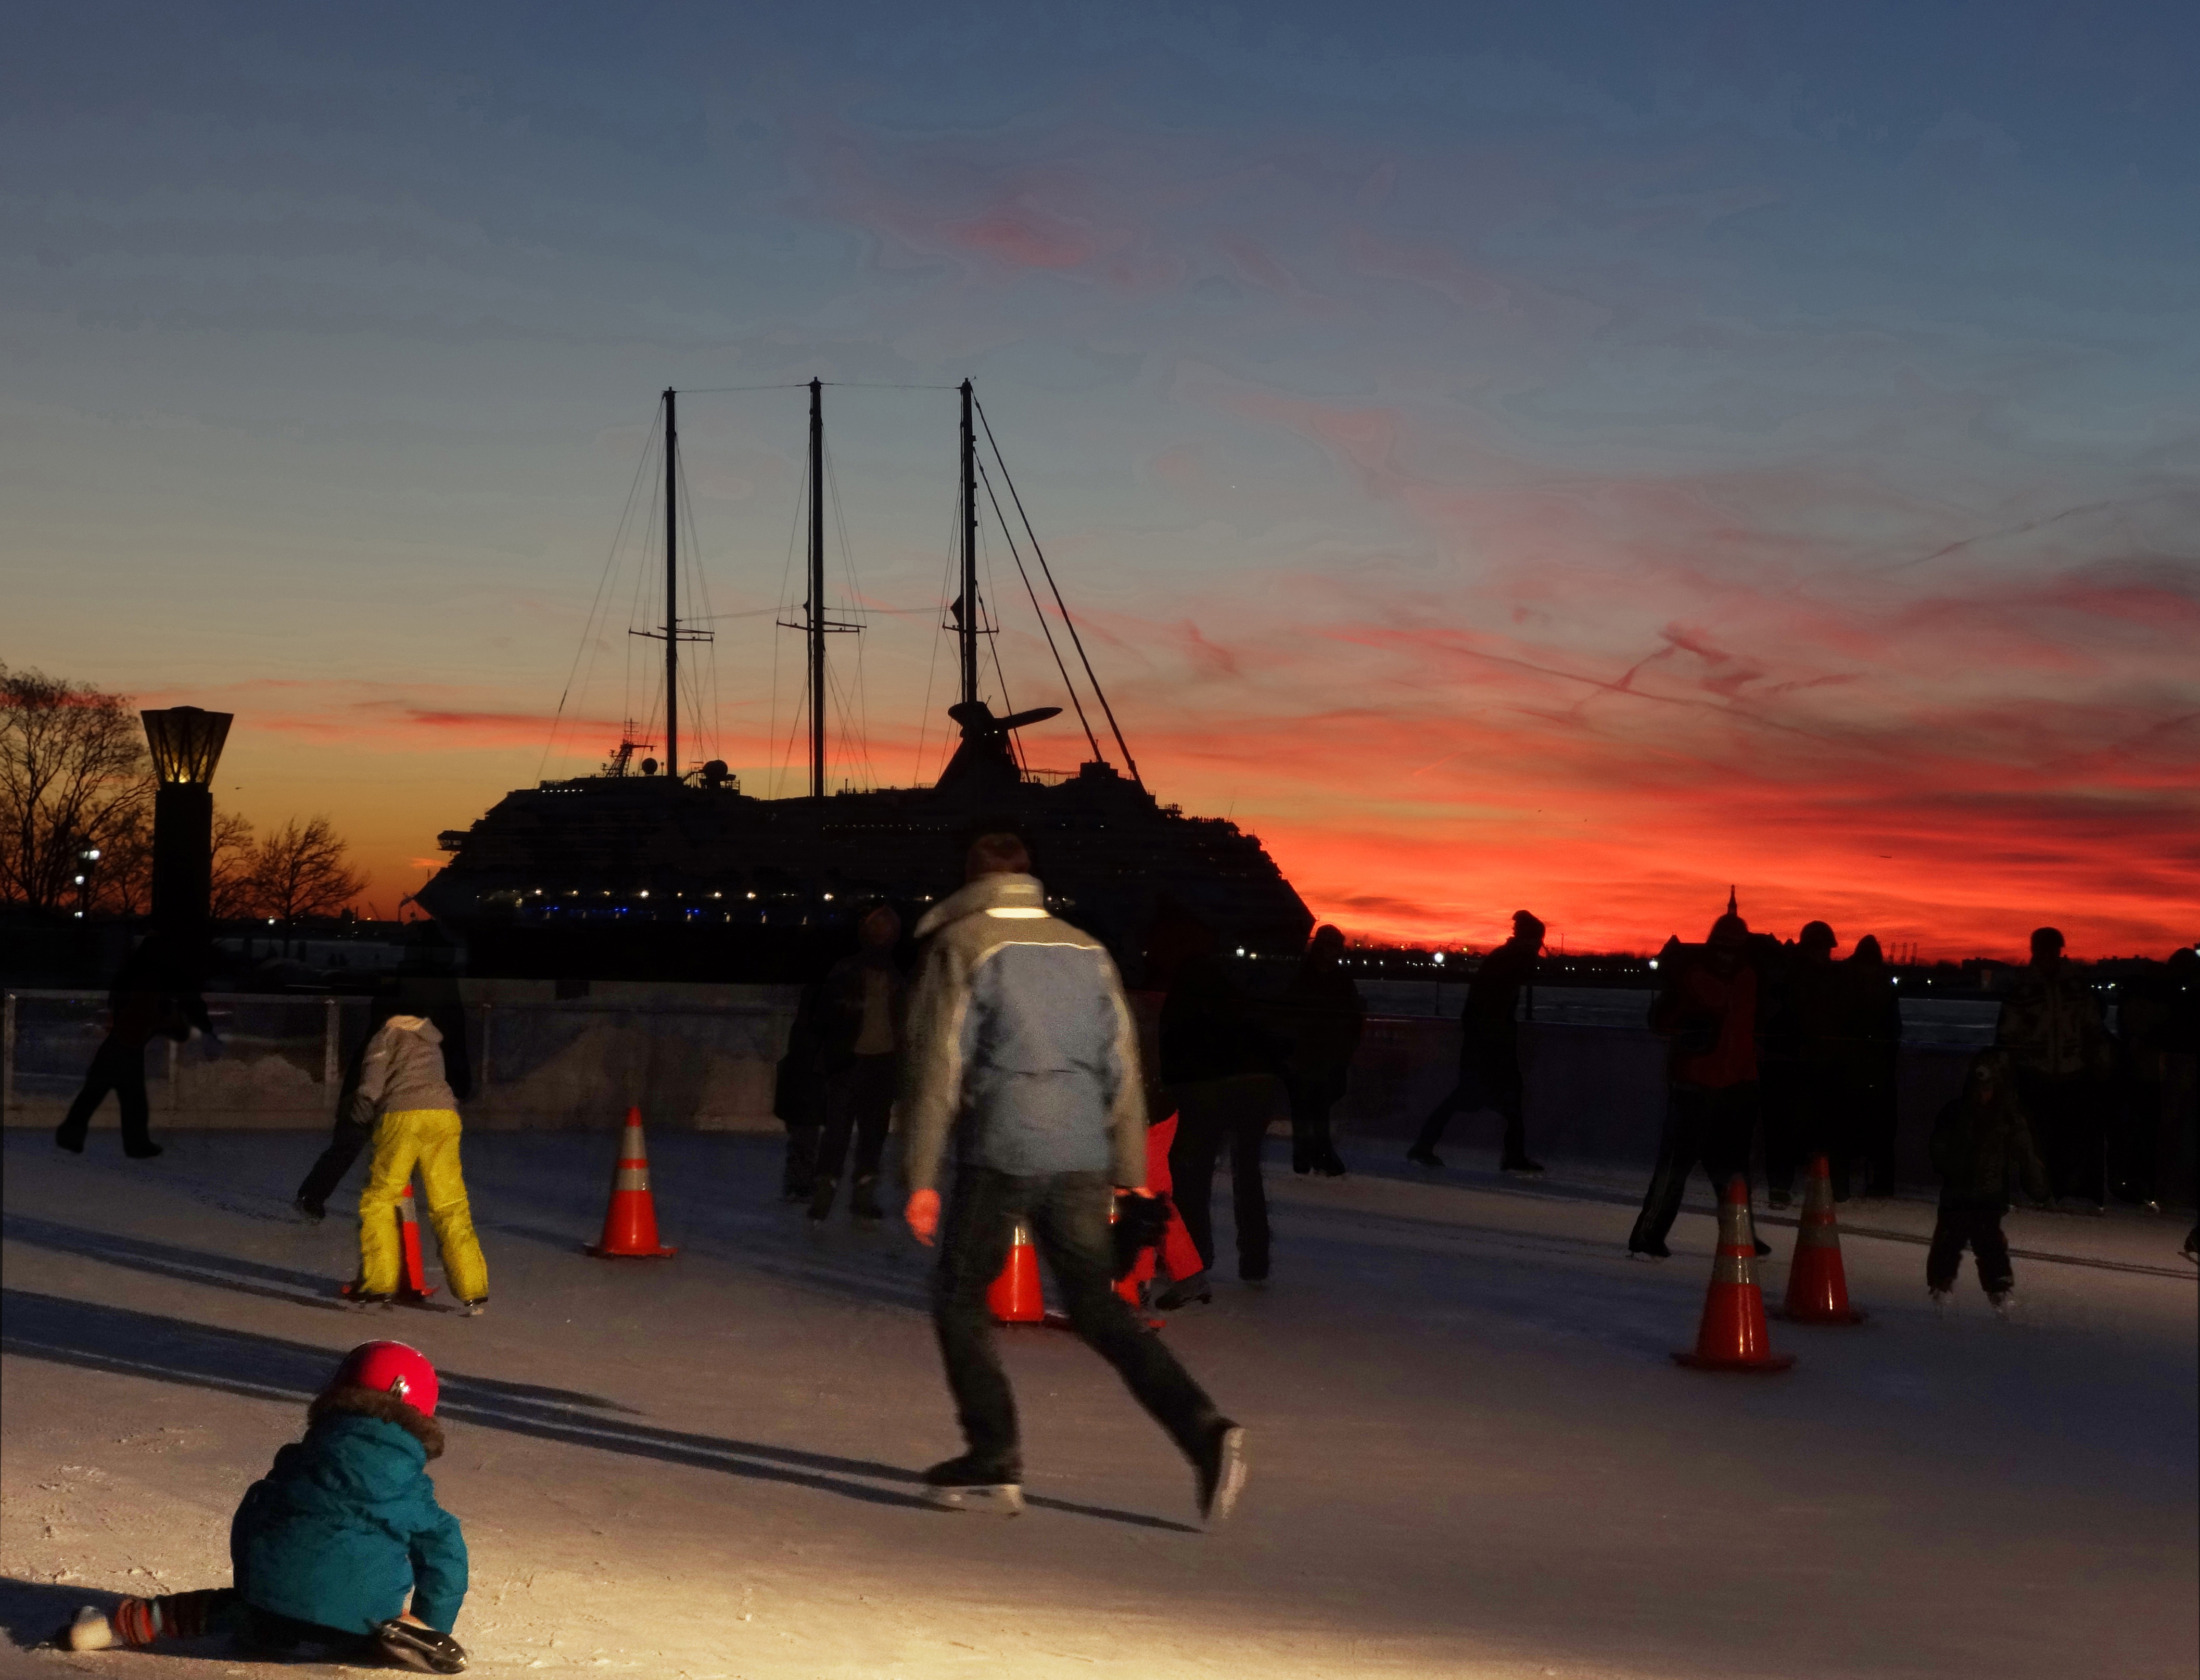 Ice rink and cruise ship sunset